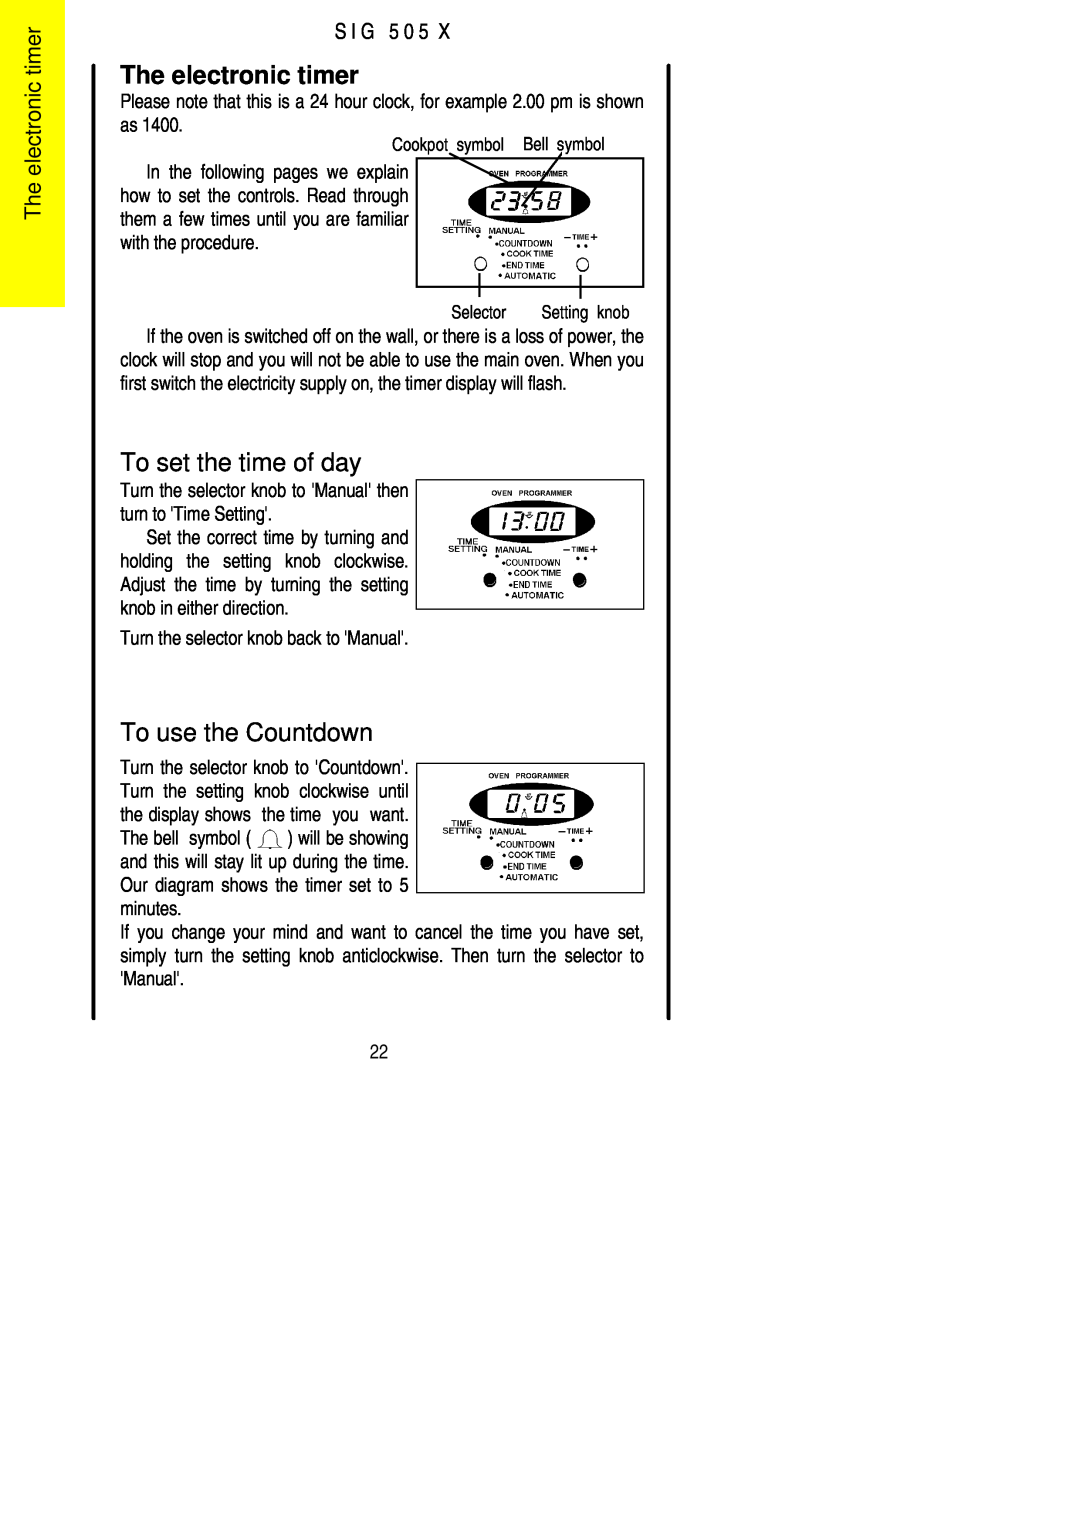 Electrolux SIG 505 X installation instructions The electronic timer, To set the time of day, To use the Countdown, S I G 